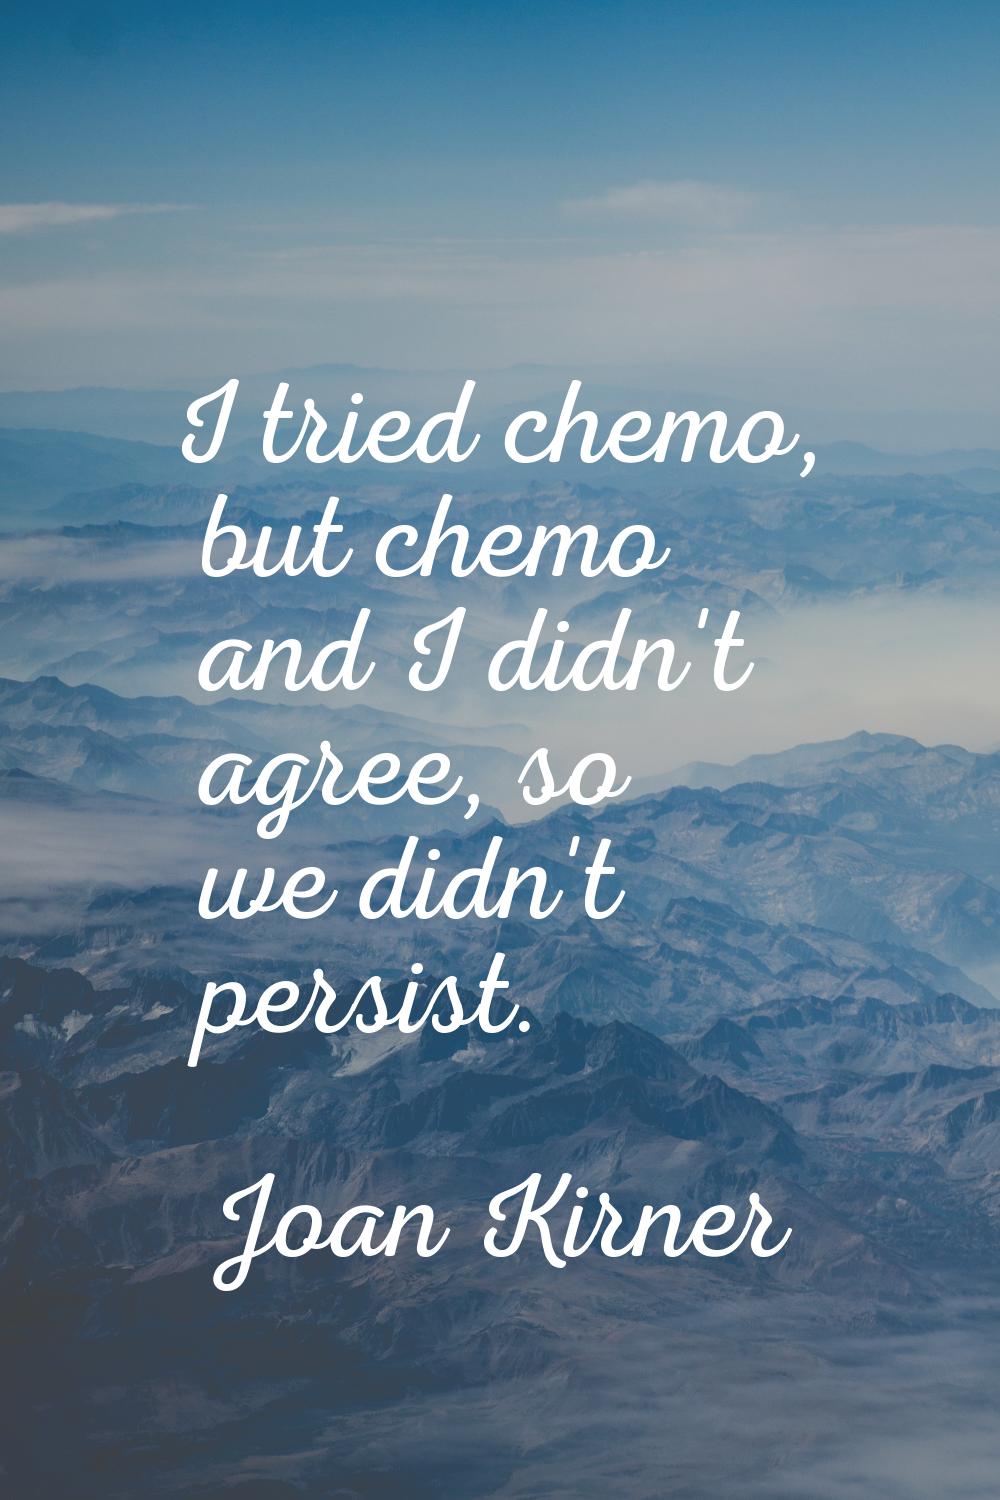 I tried chemo, but chemo and I didn't agree, so we didn't persist.